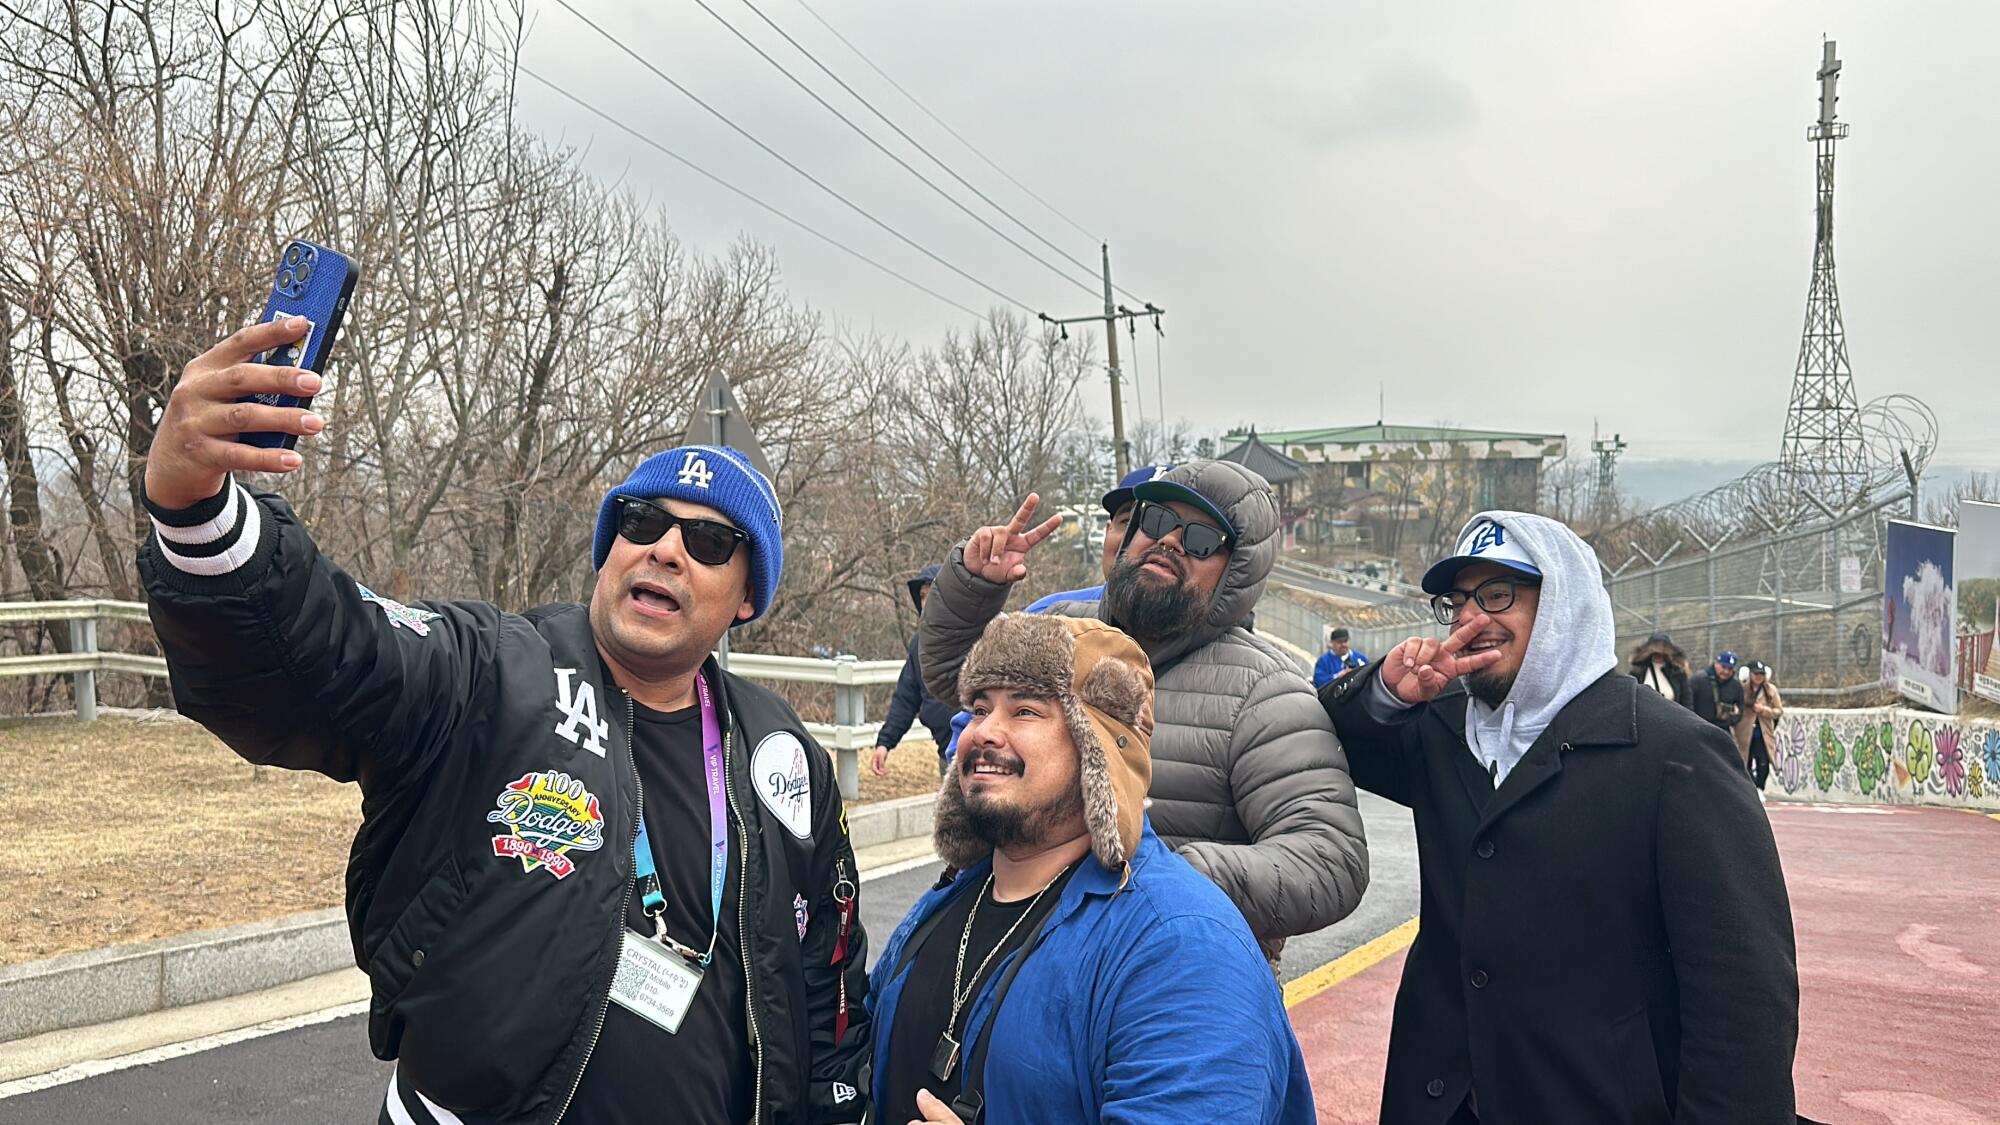 Members of Pantone 294, a Dodgers fan group, pose for a selfie while touring the demilitarized zone in Korea. 